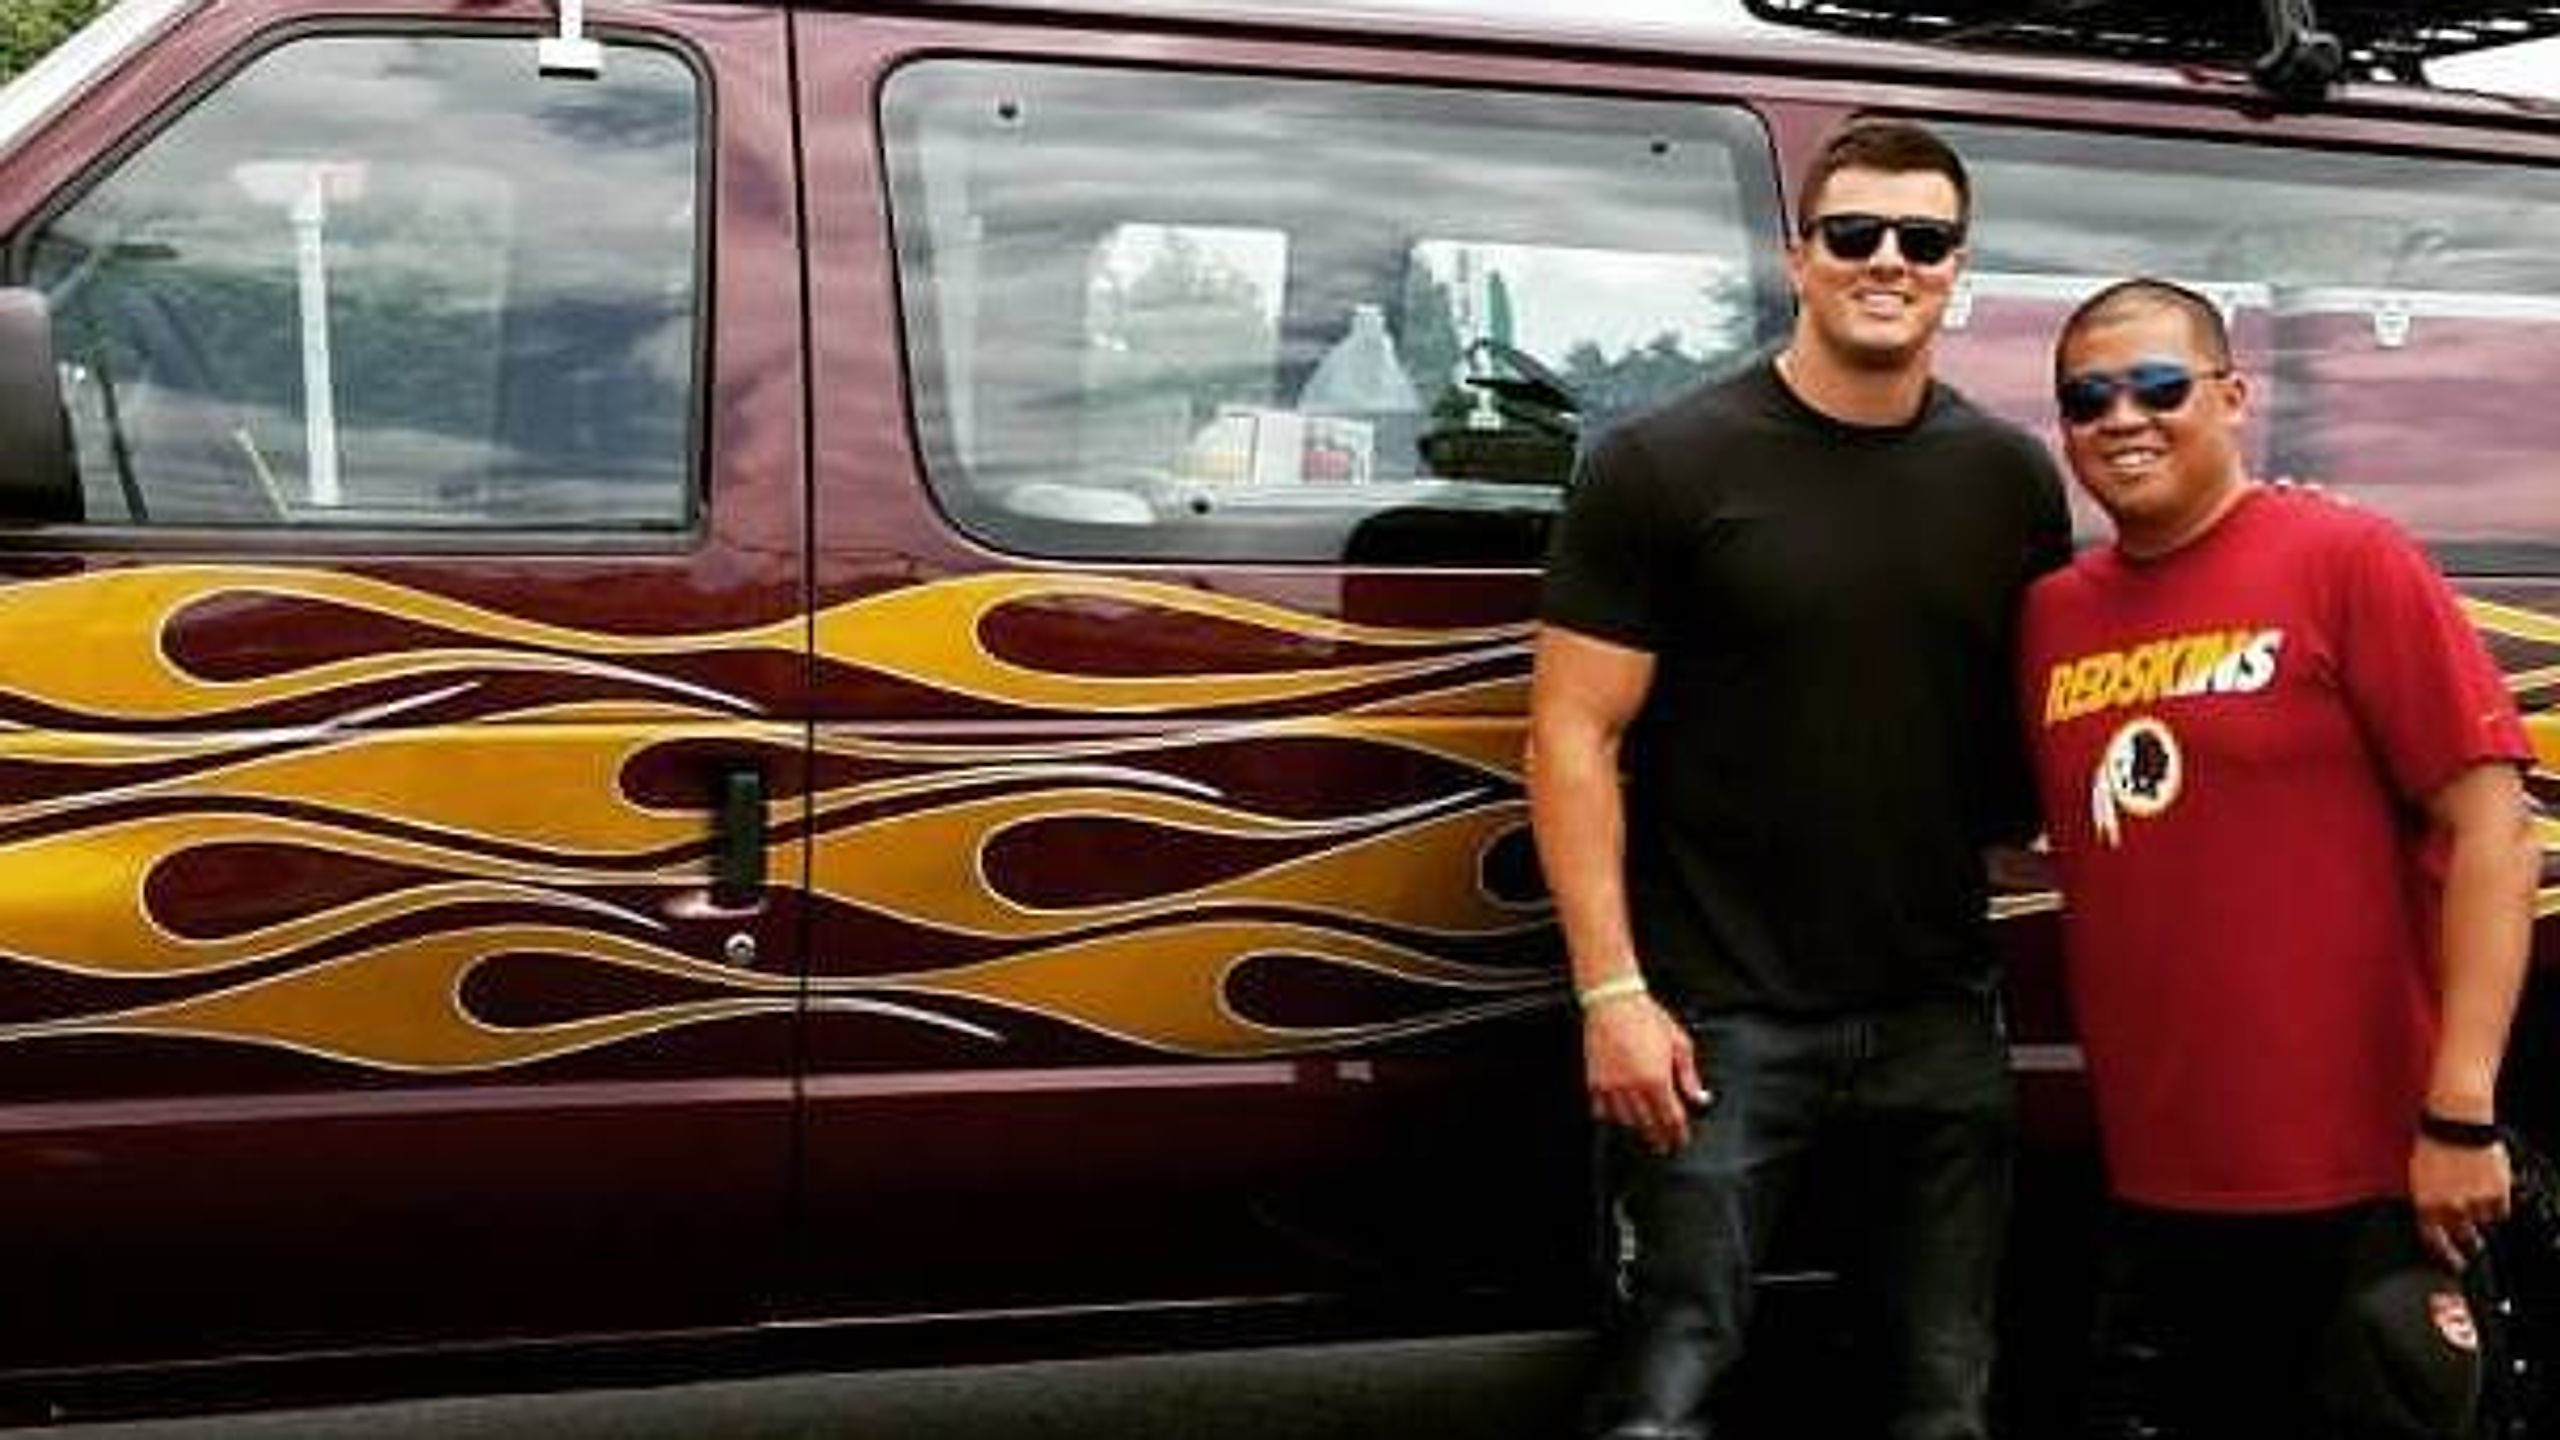 Tackle My Ride with Ryan Kerrigan and the Washington Redskins